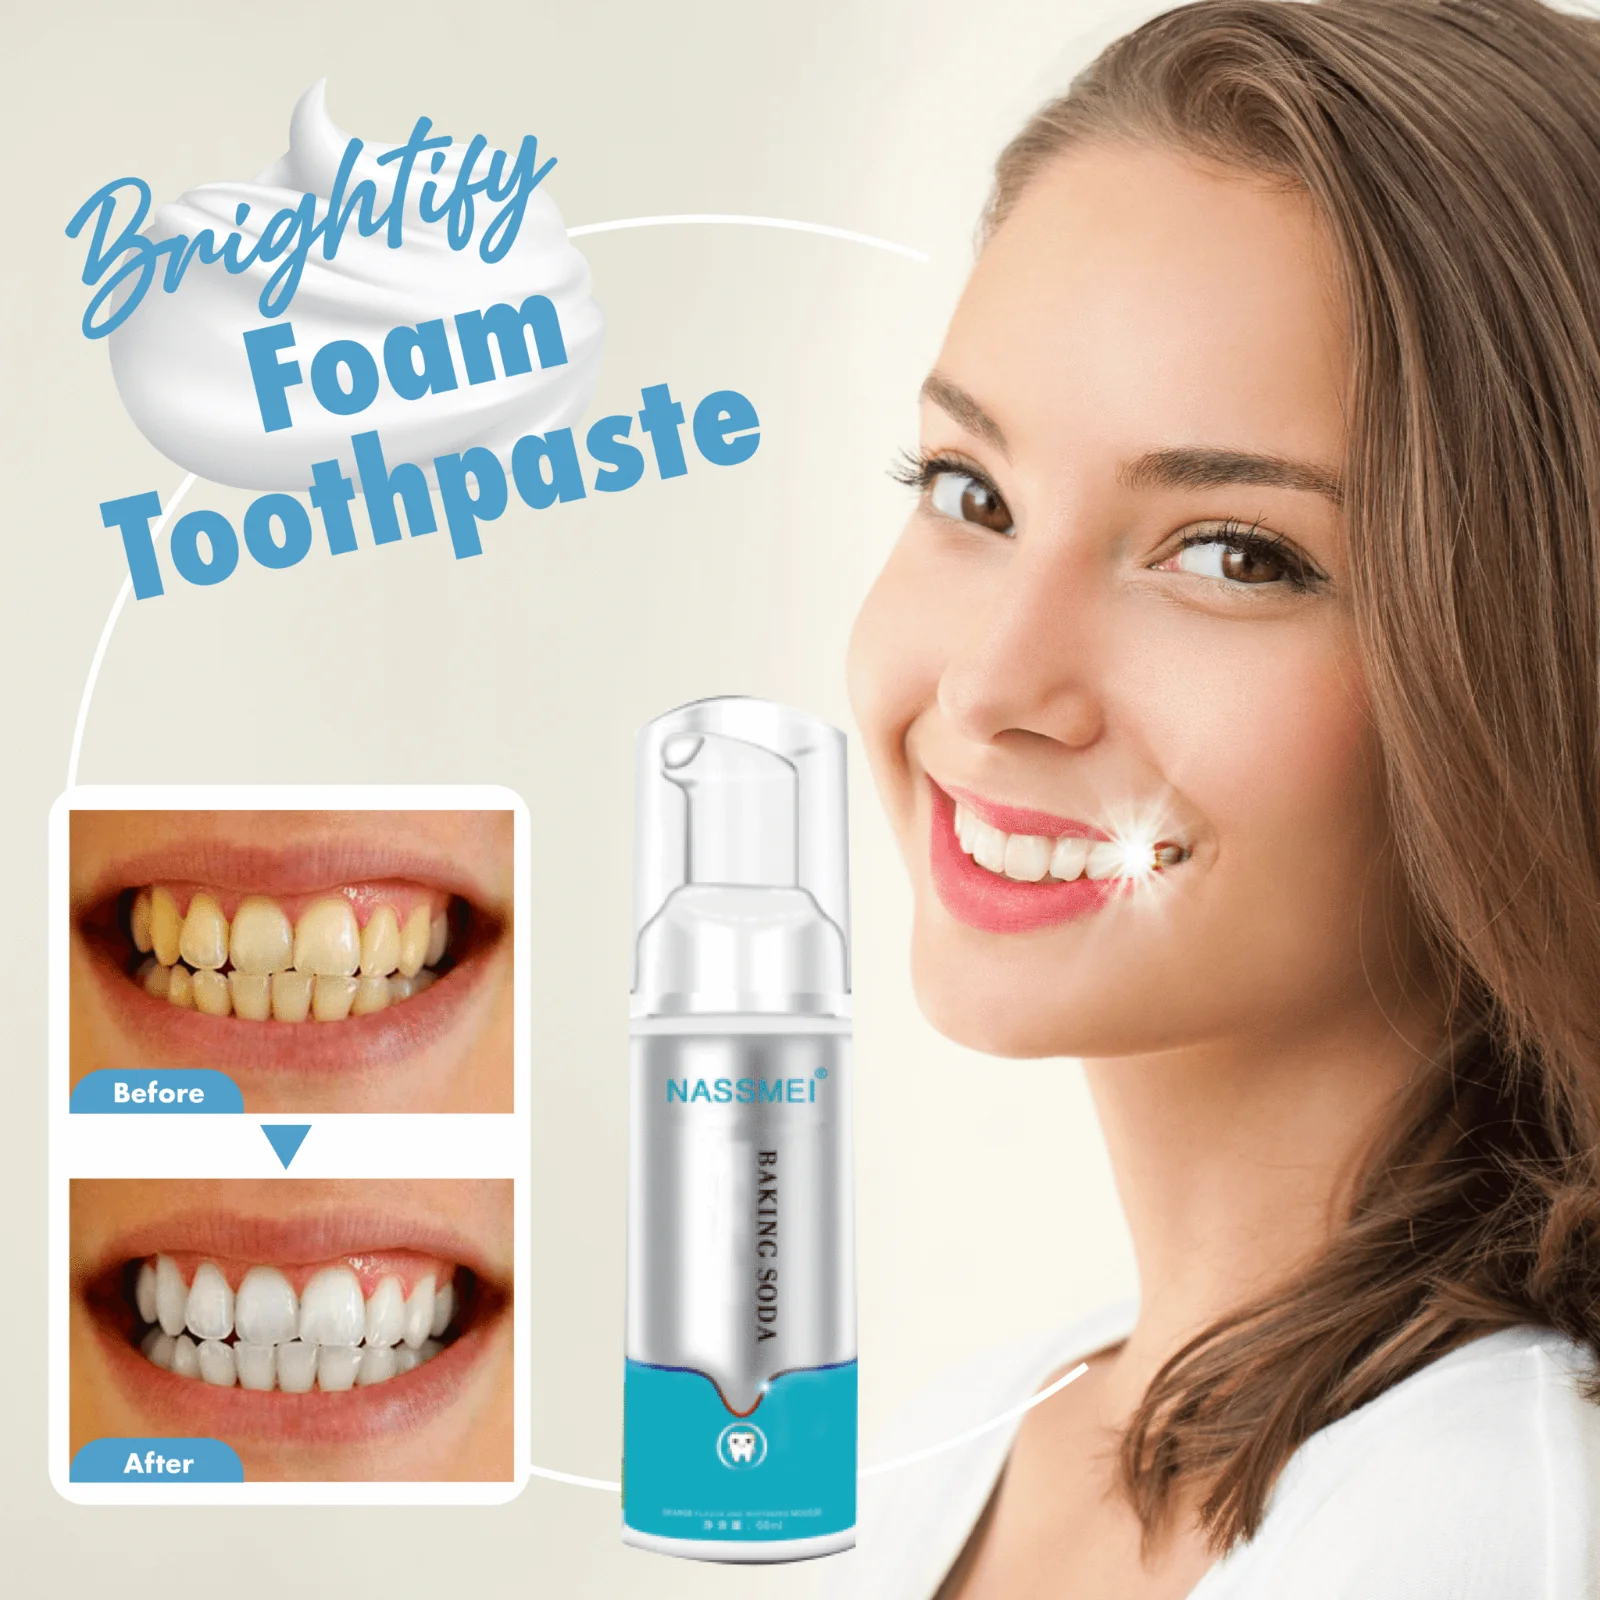 

60ml Brightify Deep Cleaning Foam Toothpaste Fluoride-Free Mousse Foam Teeth Cleaning and Whitening Products